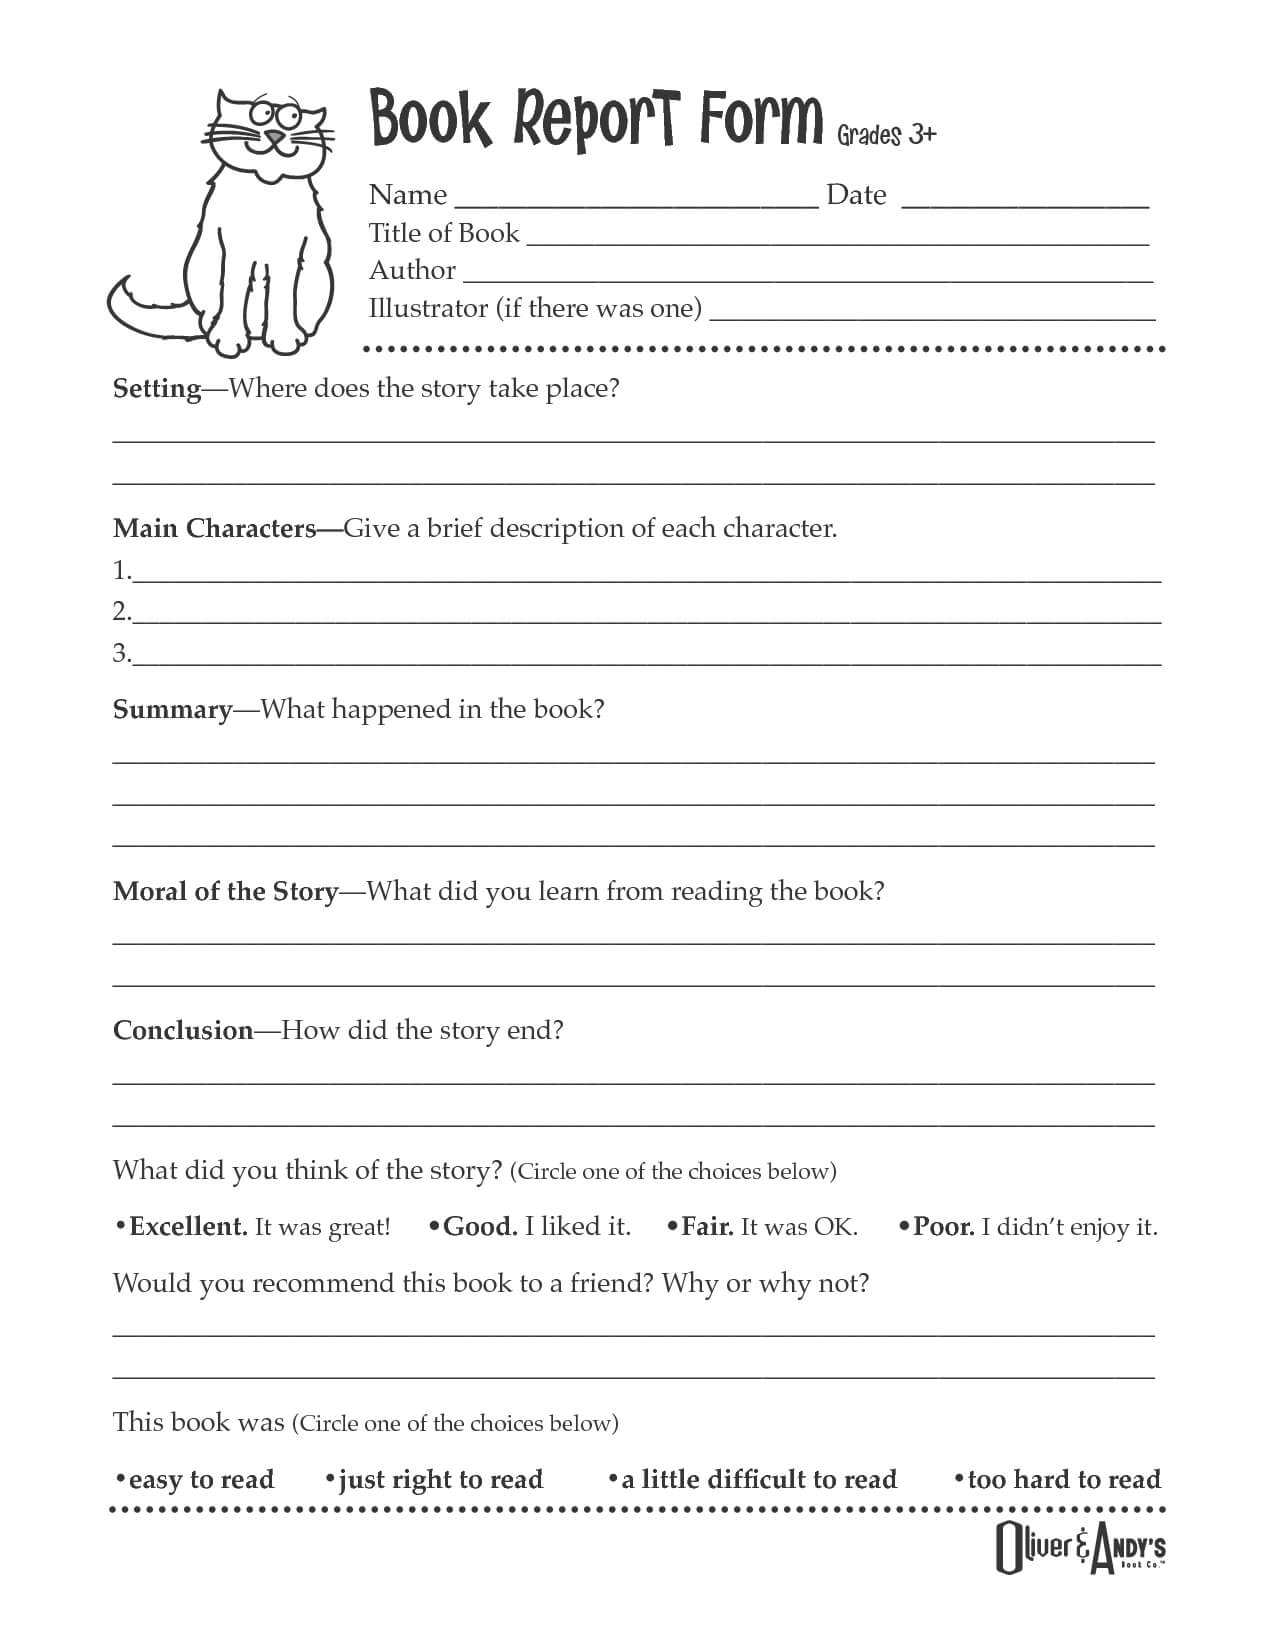 Second Grade Book Report Template | Book Report Form Grades For Story Report Template